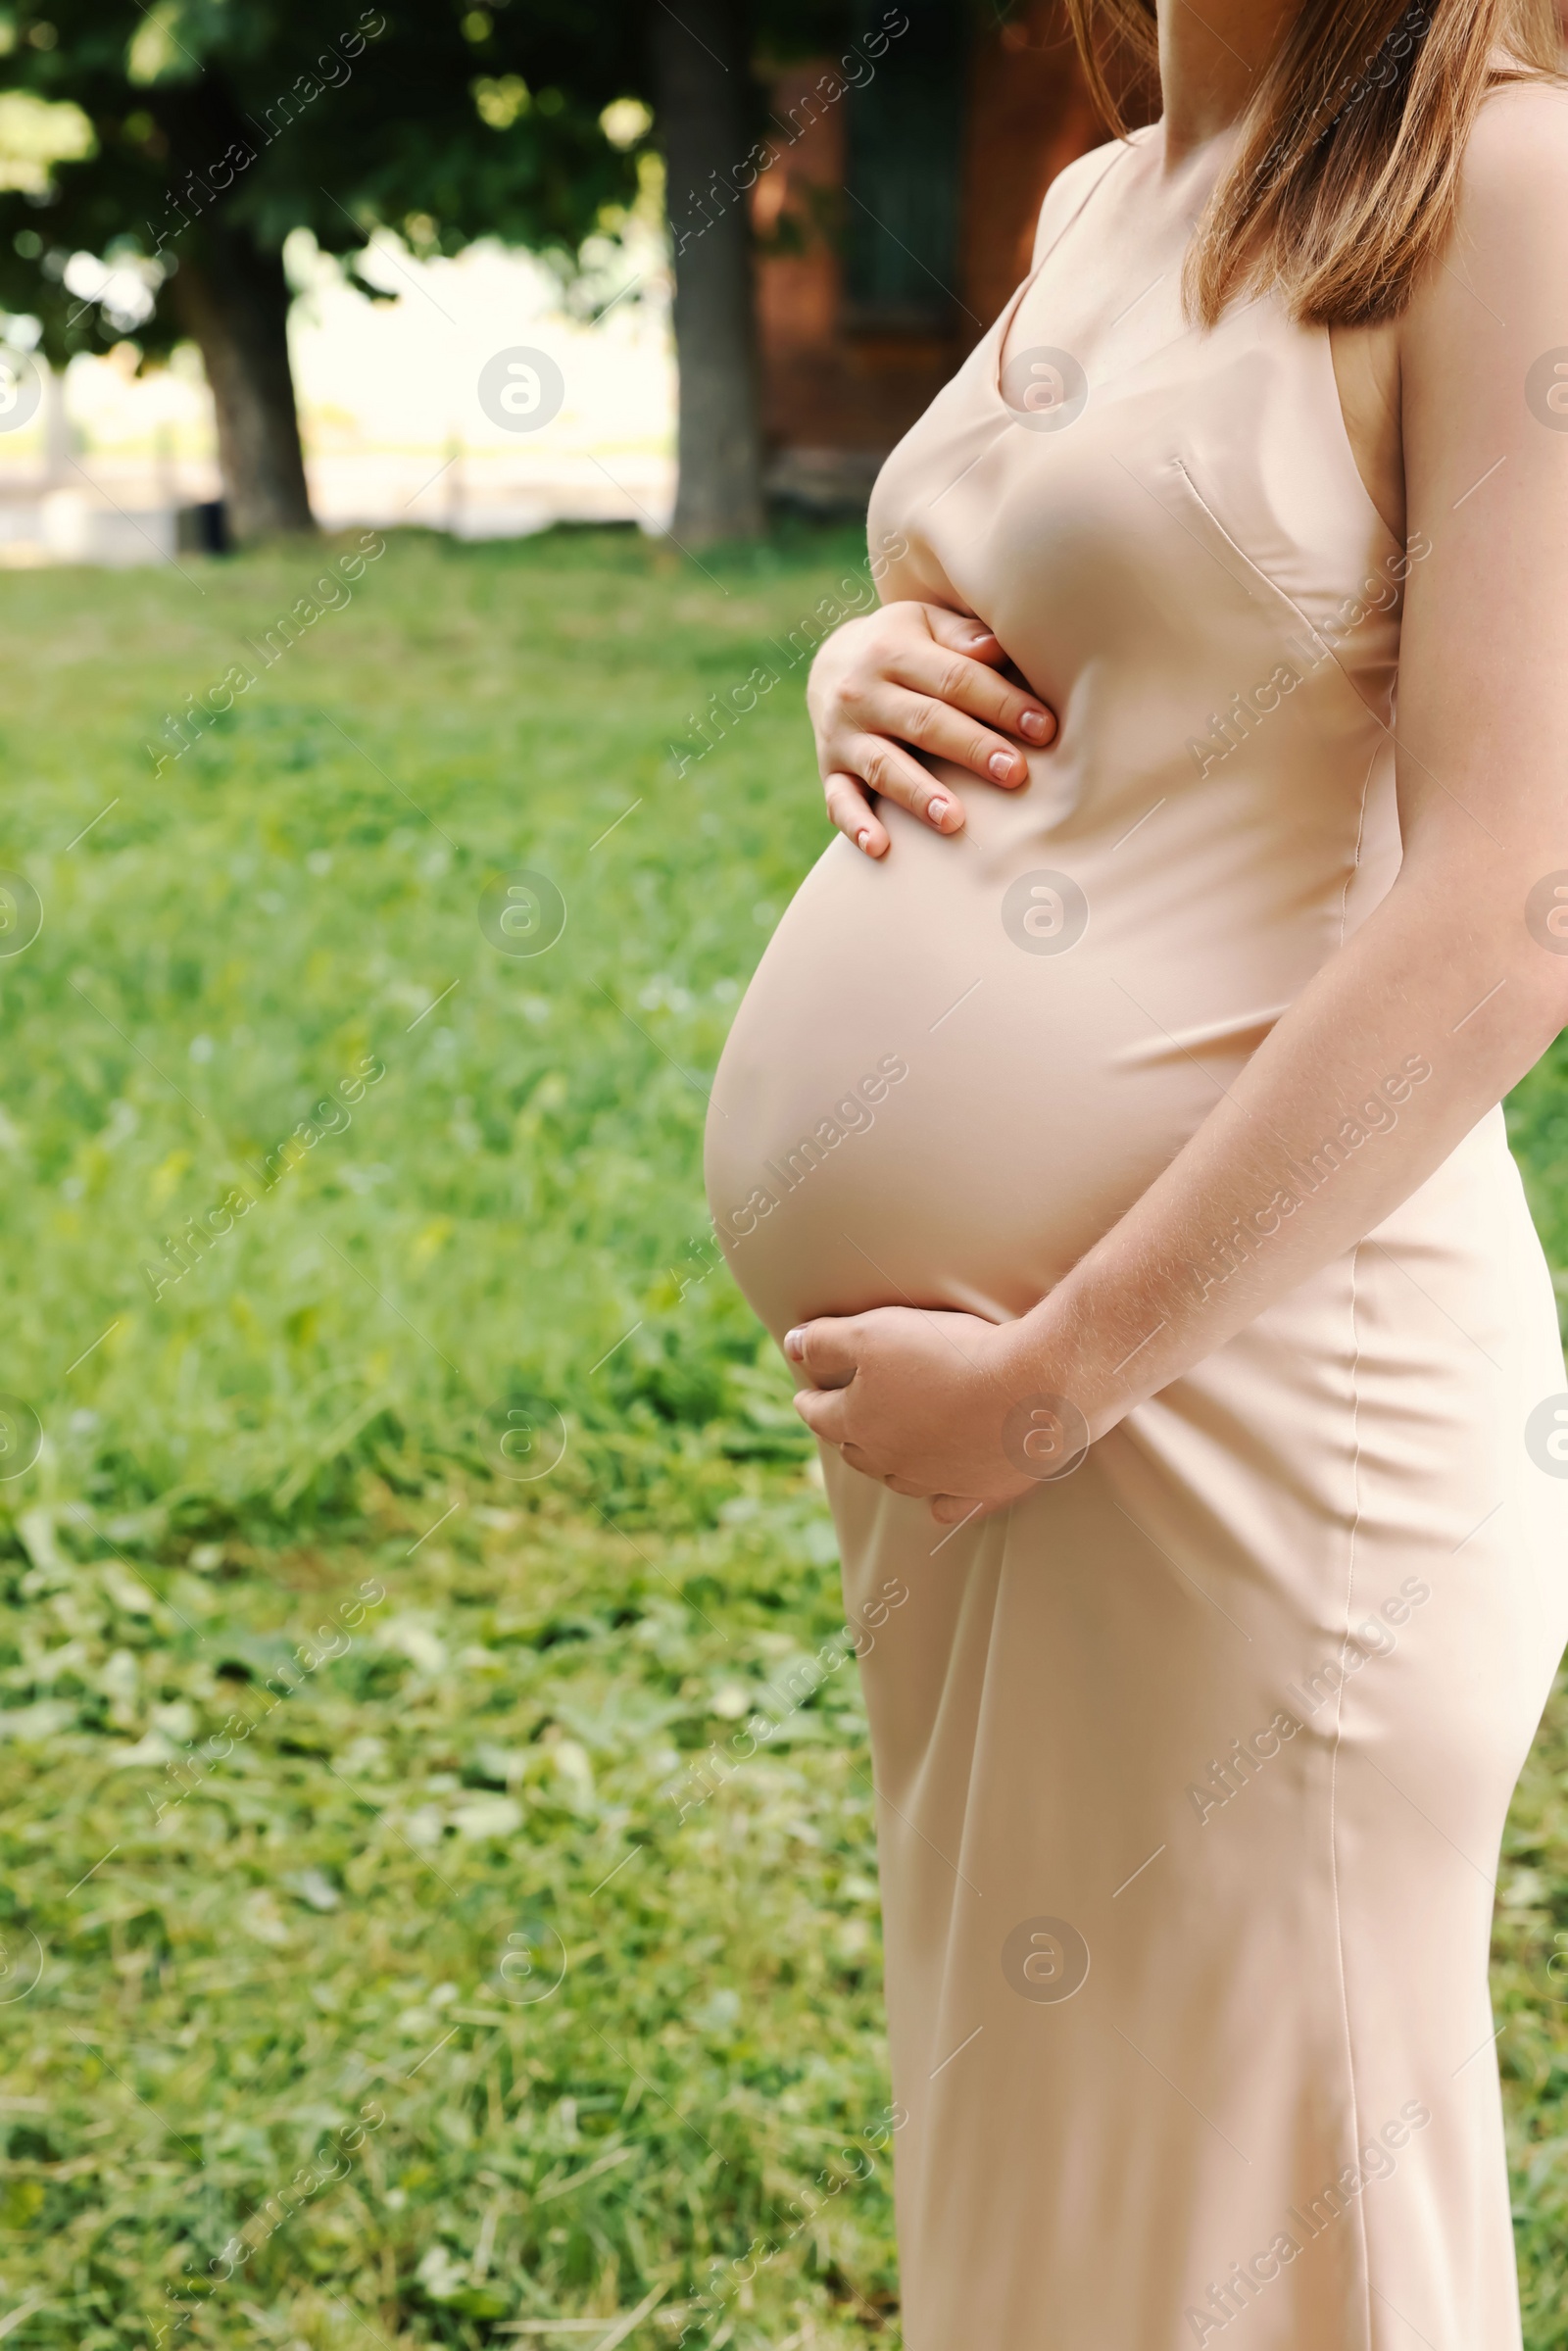 Photo of Pregnant woman touching belly outdoors, closeup view